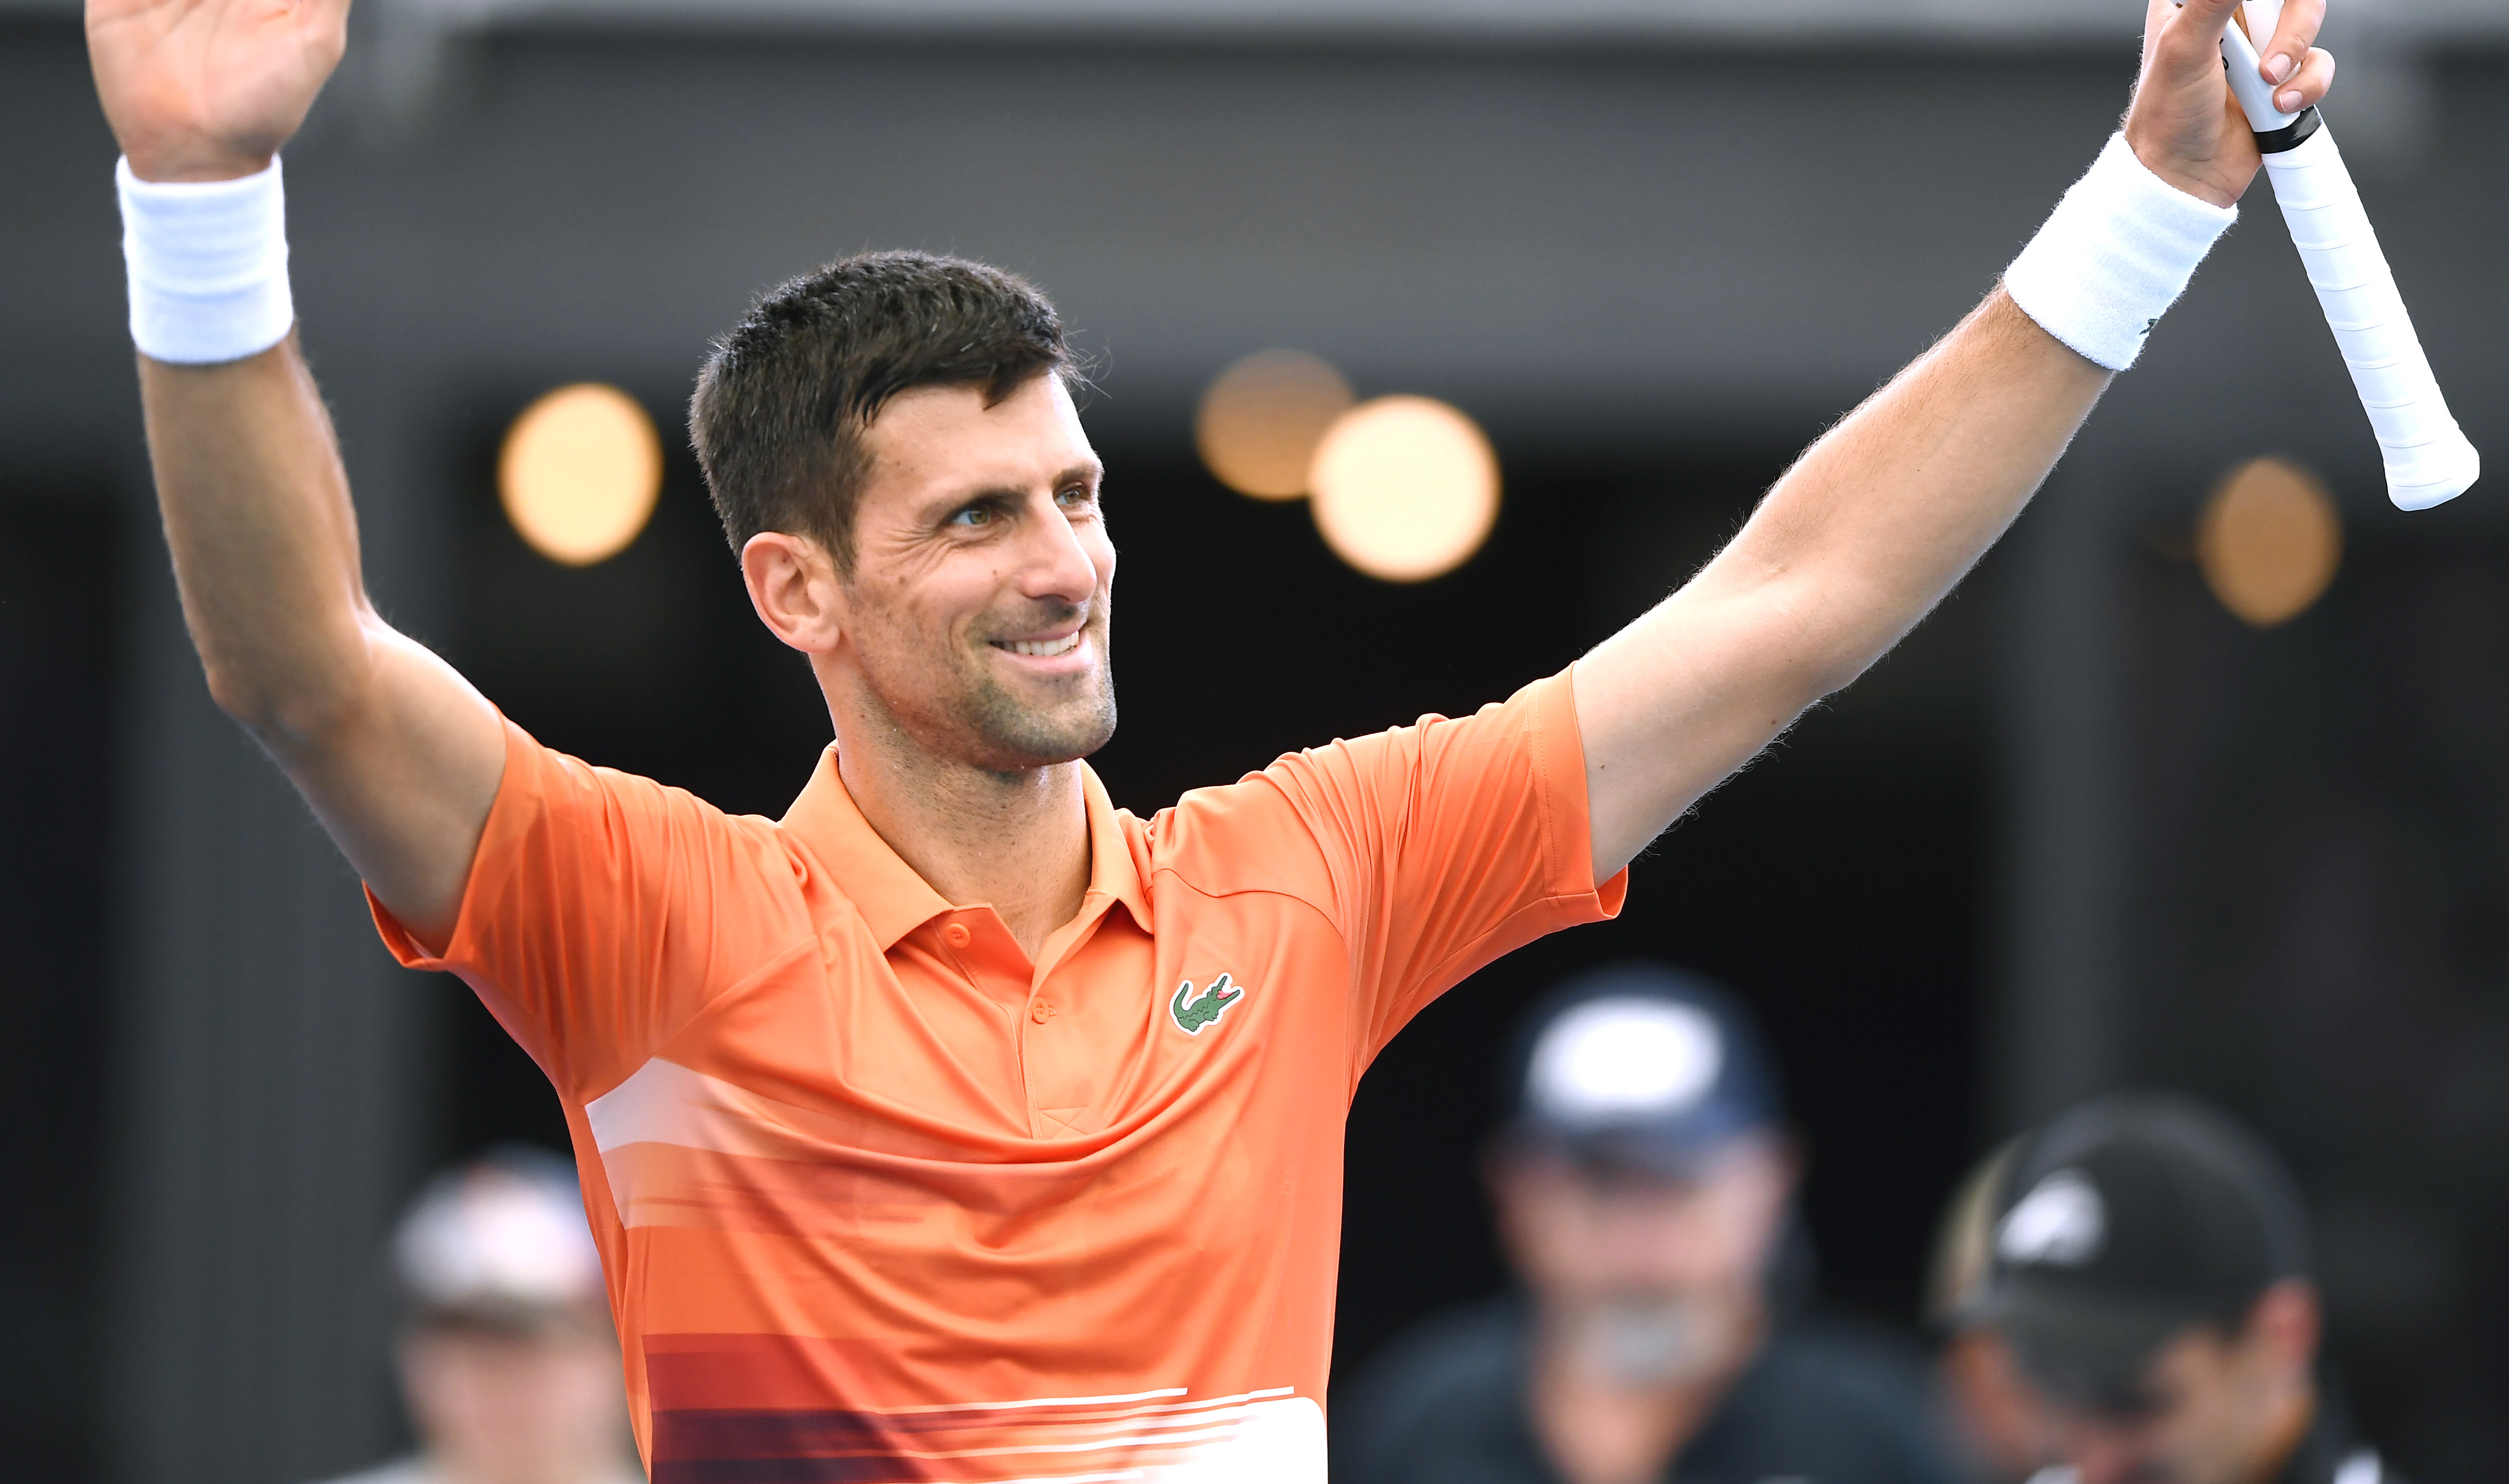 Stat of the Day Novak Djokovic extends winning streak in Australia to 30 matches in a row